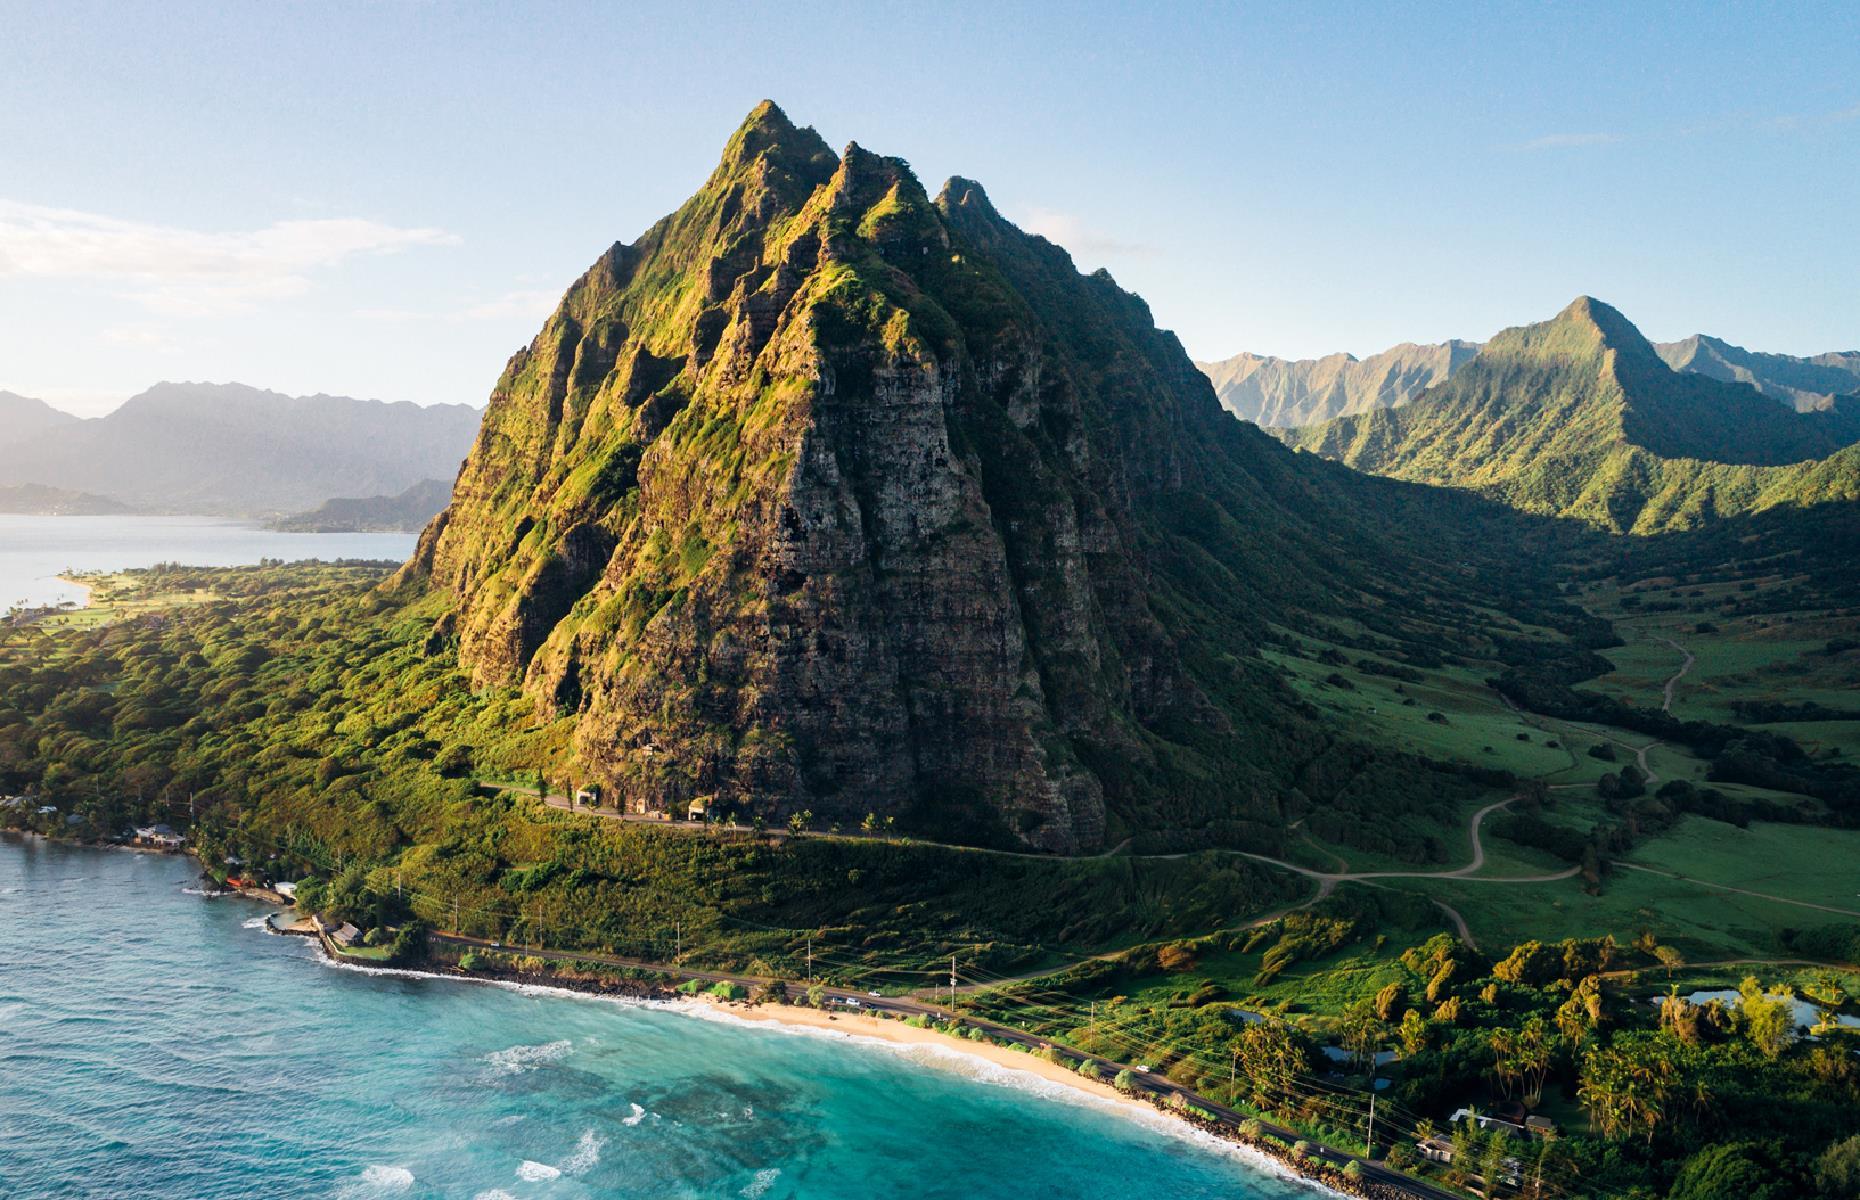 It's no secret that Hawaii is beautiful. Its rainforests, beaches, waterfalls, and wildlife make it every inch the island paradise, and there's plenty of history to discover too.  Read on for 30 photos showing the archipelago in all its glory, and proving just why Hawaii is so very special.